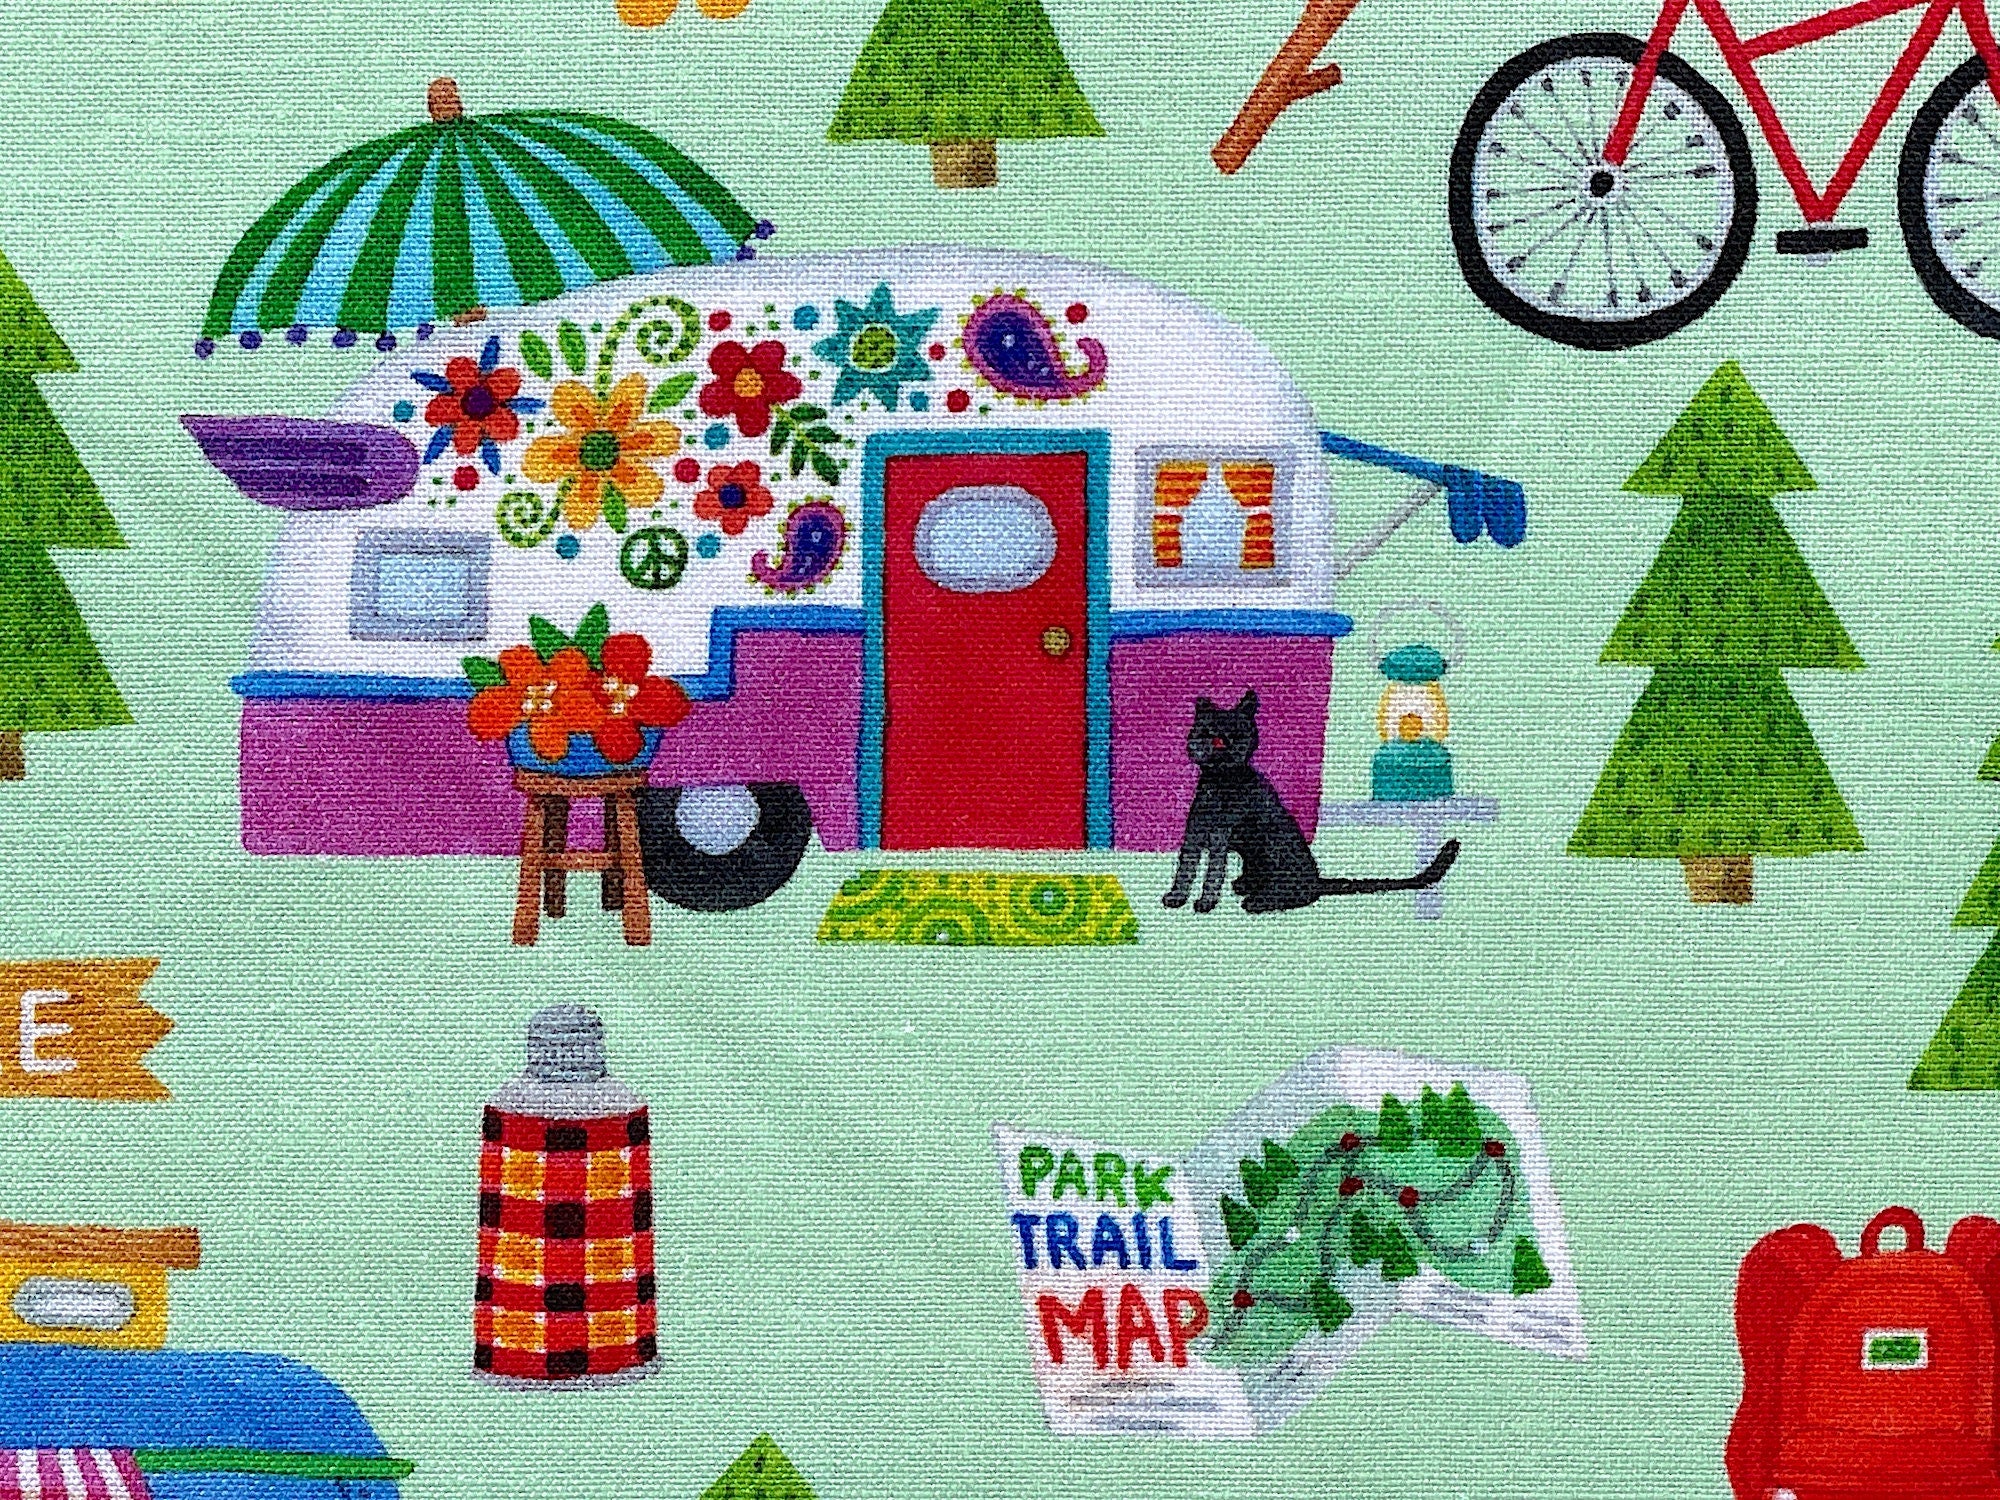 Close up of a travel trailer, cat, tree, park trail map and more.